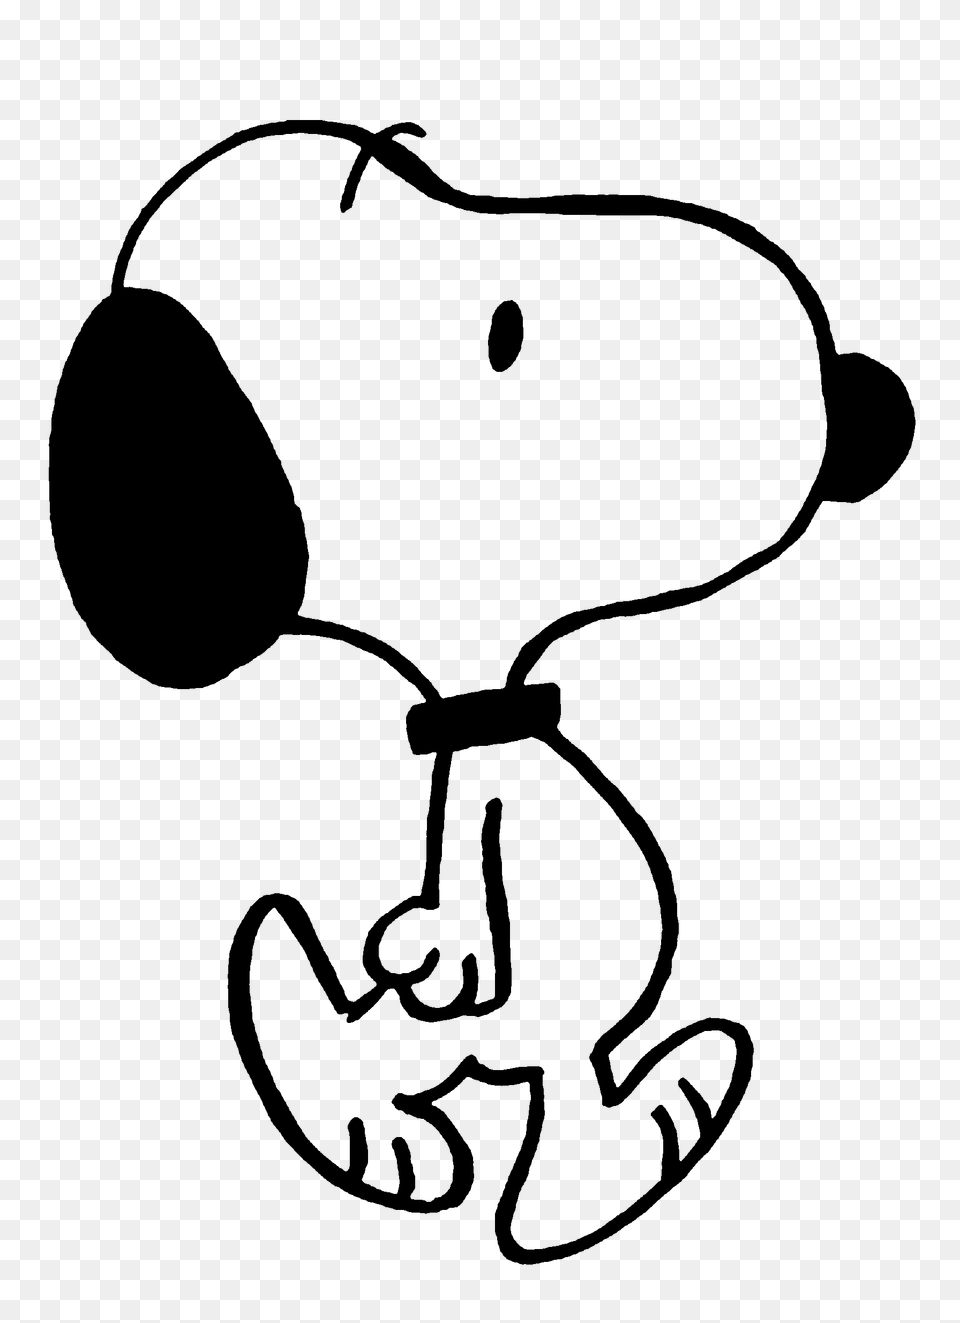 Hd Wallpapers Snoopy Black And White Smoopy, Stencil, Animal, Mammal, Rat Free Png Download